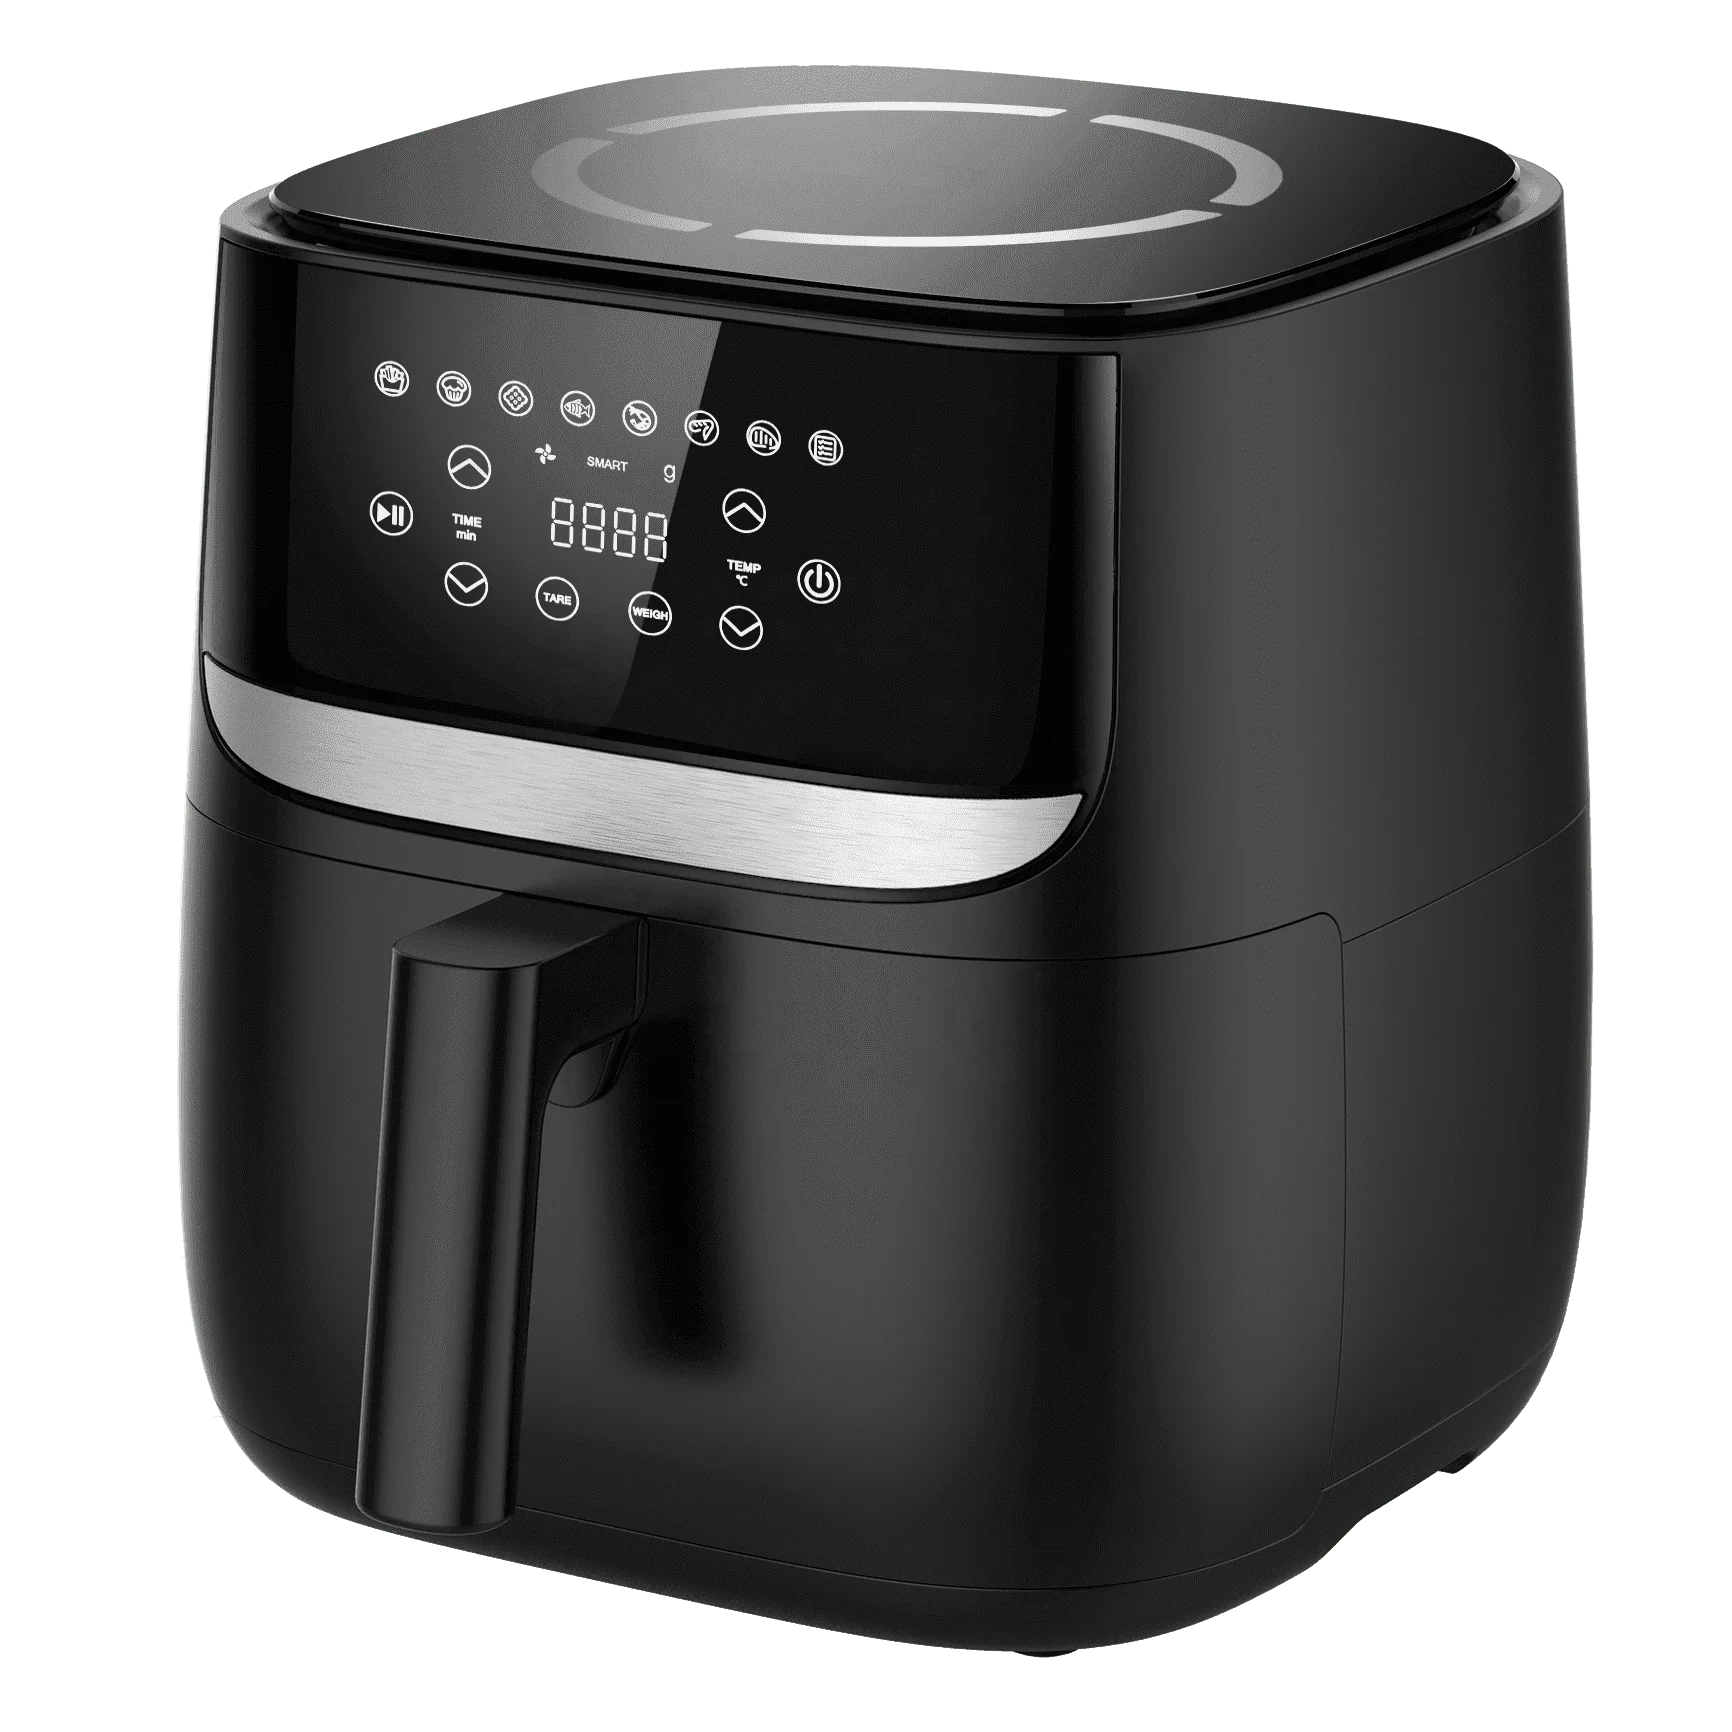 KONKA Multifunction Air Fryer 1000W Oil Free Timer Function Overheat  Protection